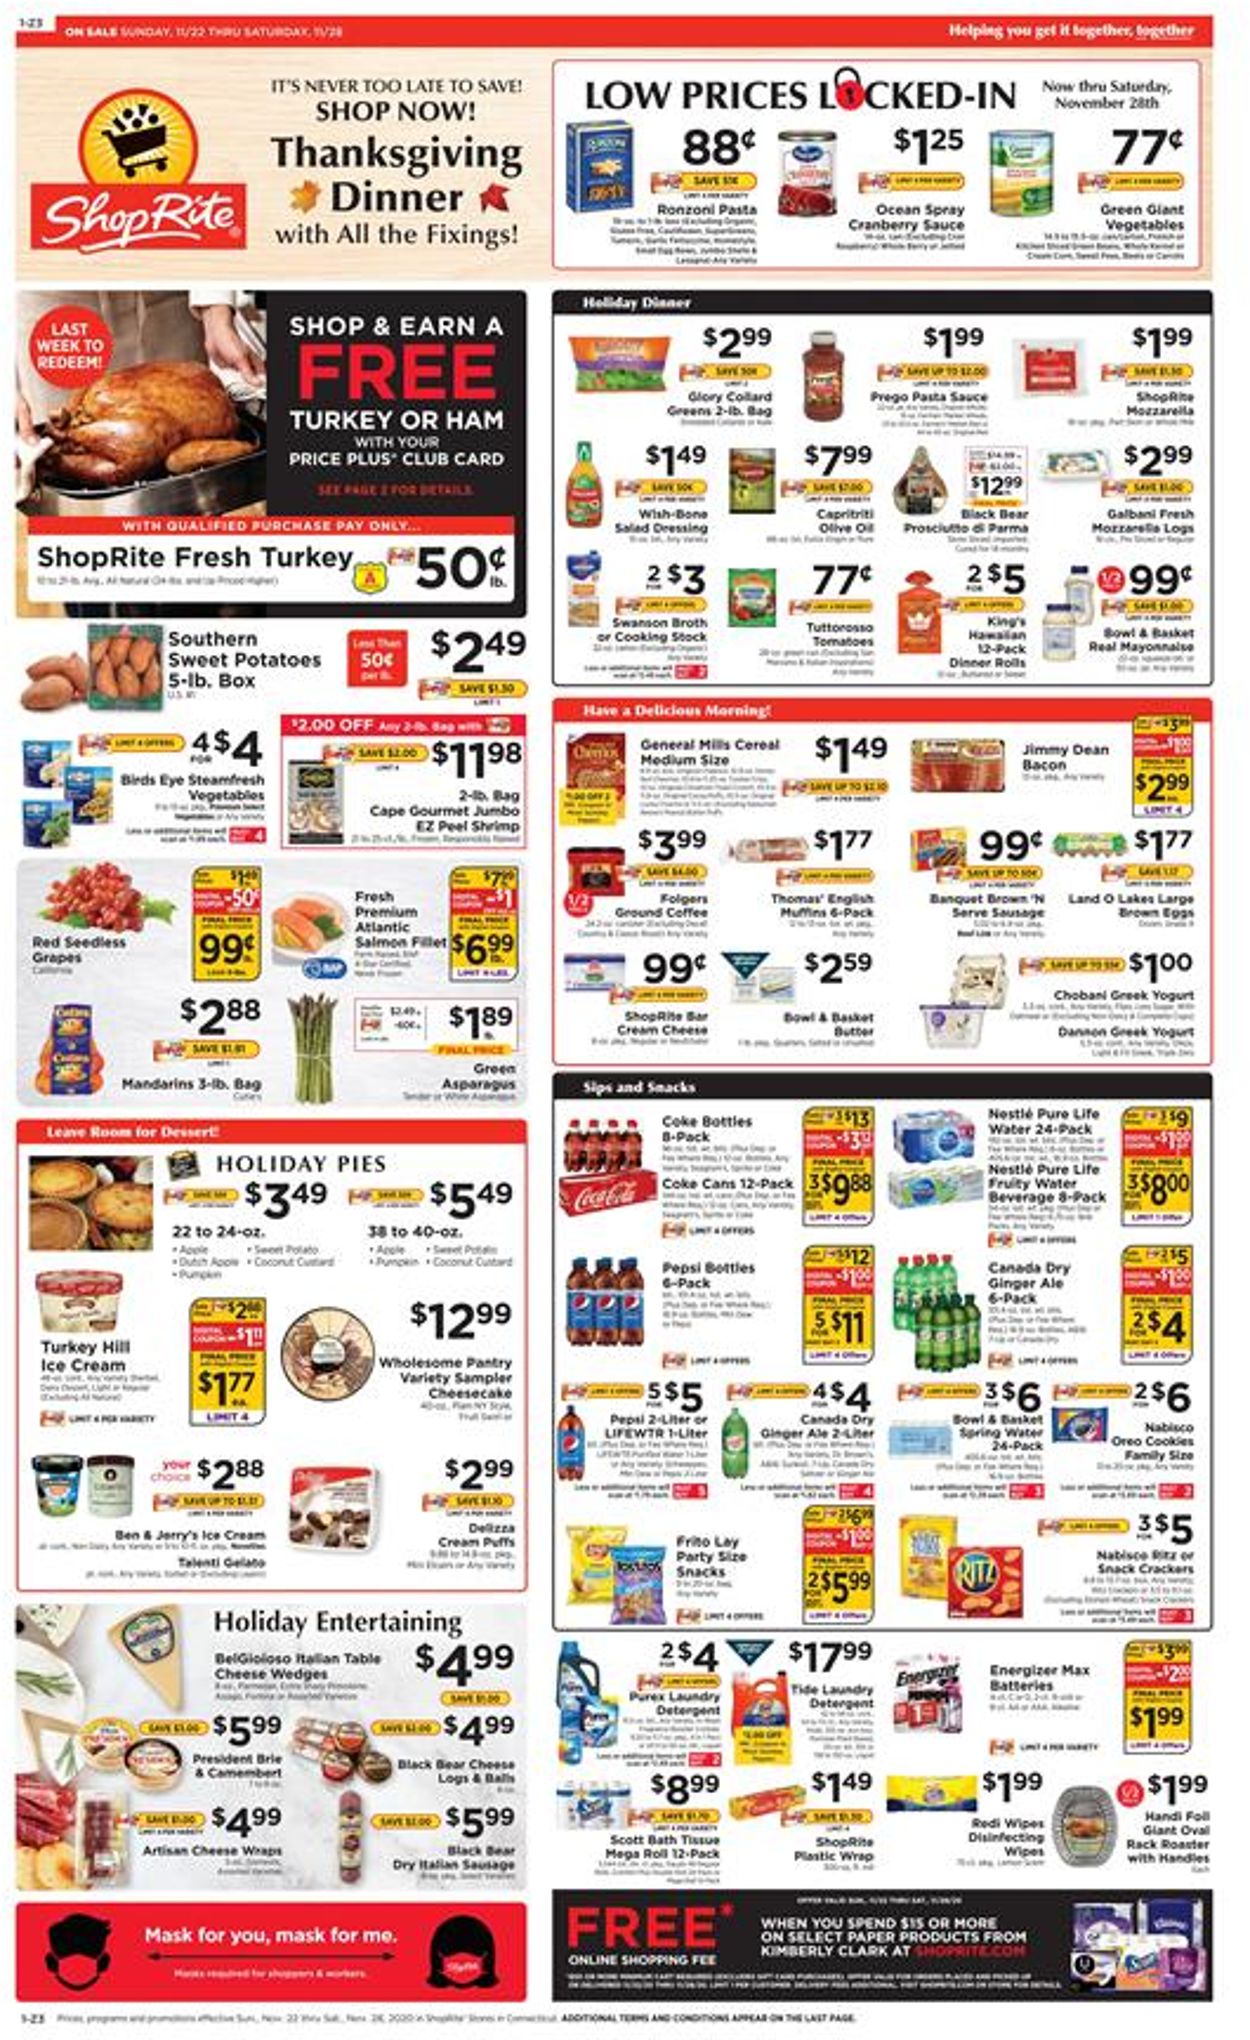 ShopRite Thanksgiving 2020 Current weekly ad 11/22 - 11/28/2020 ...